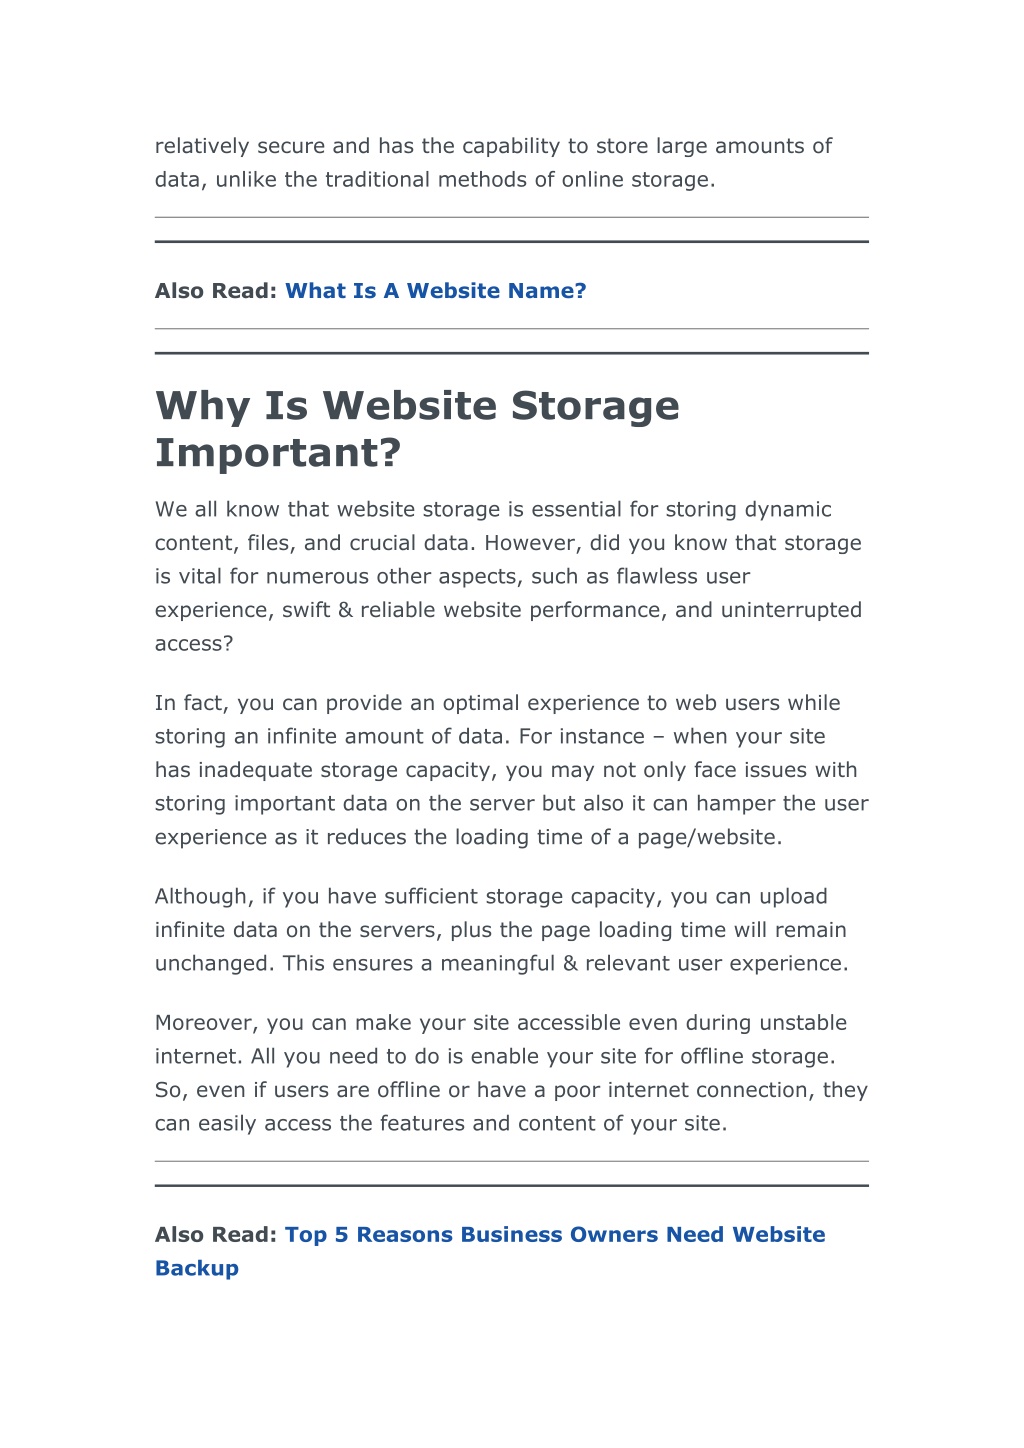 How Much Storage Do I Need For My Website? Must-Know Factors